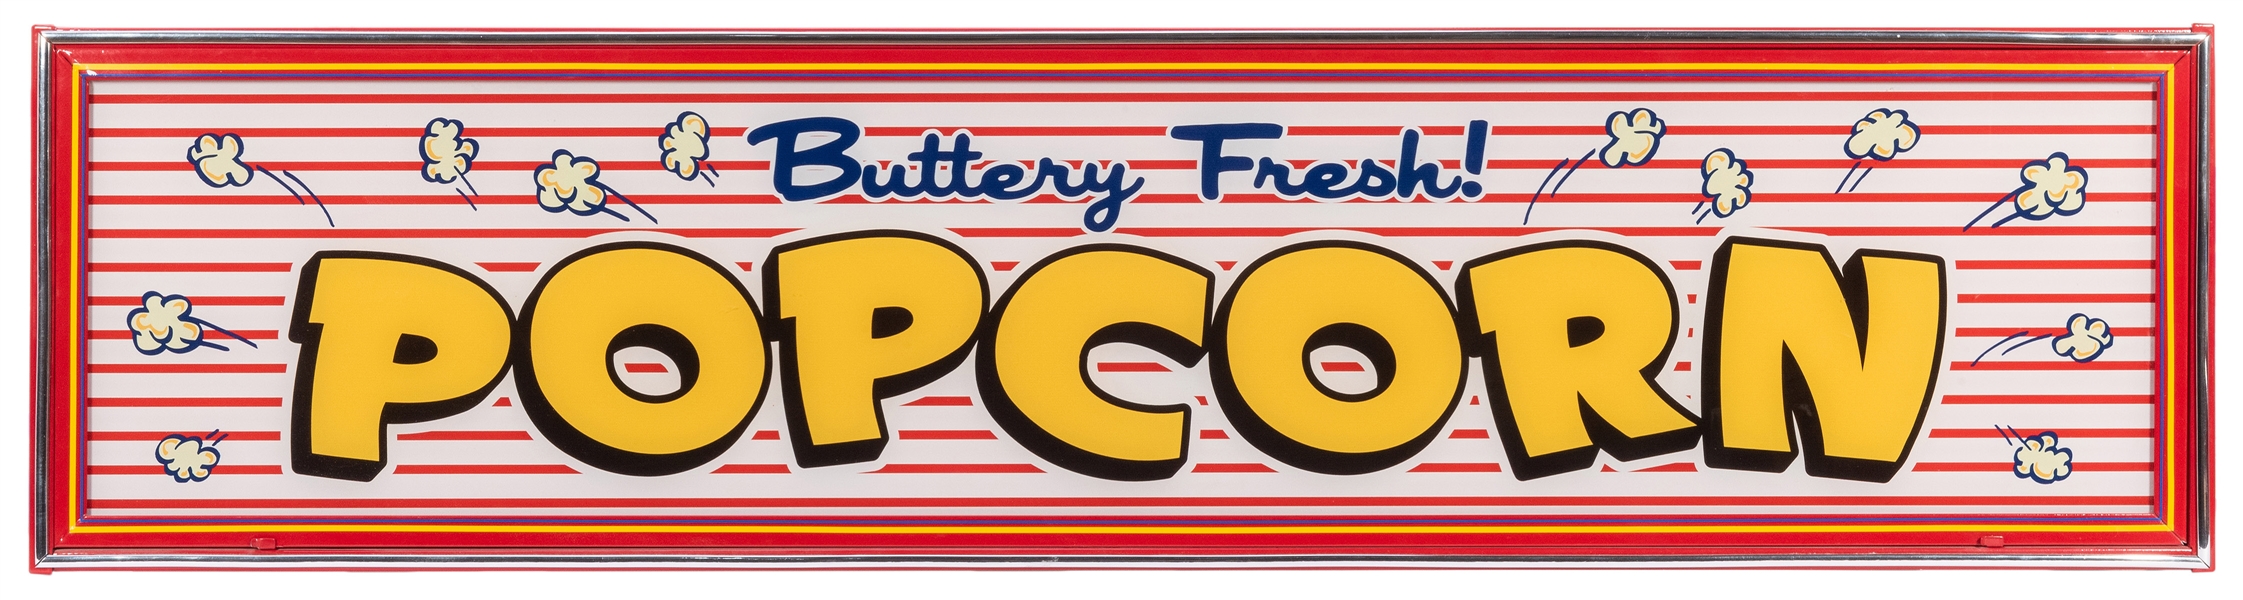  “Buttery Fresh! Popcorn” Lighted Sign. Plastic and metal li...